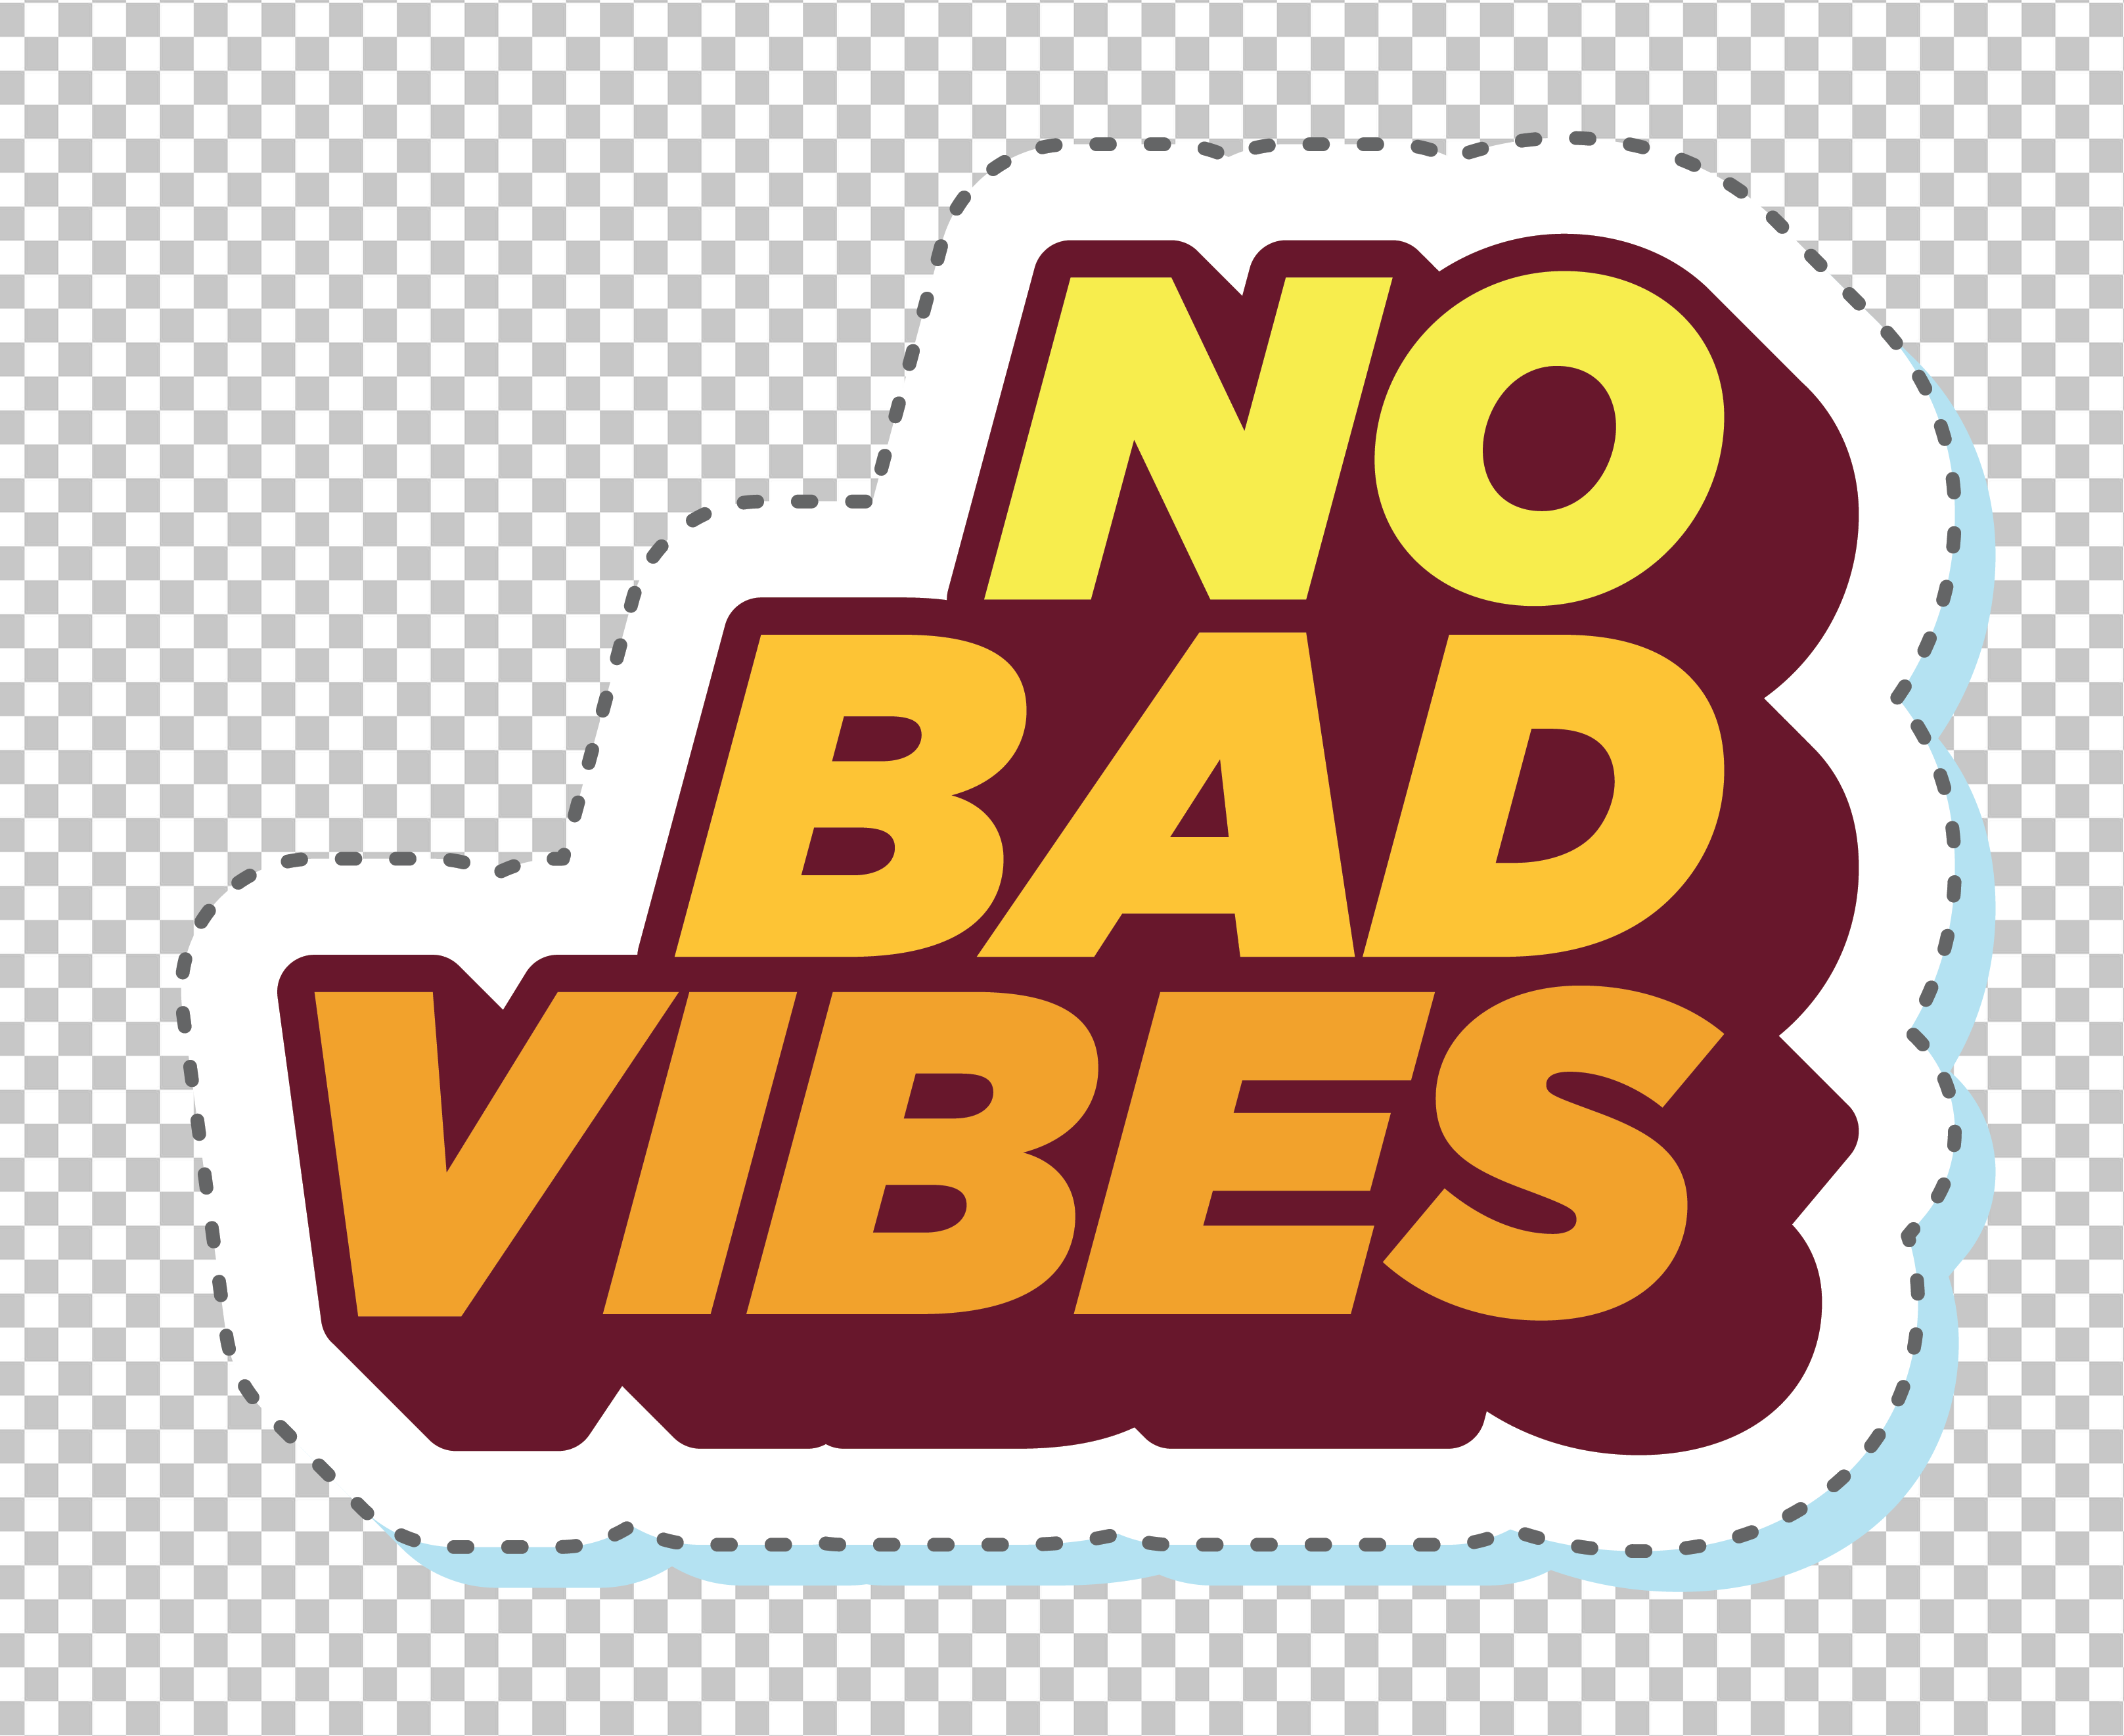 NO BAD VIBES Sticker PNG Image